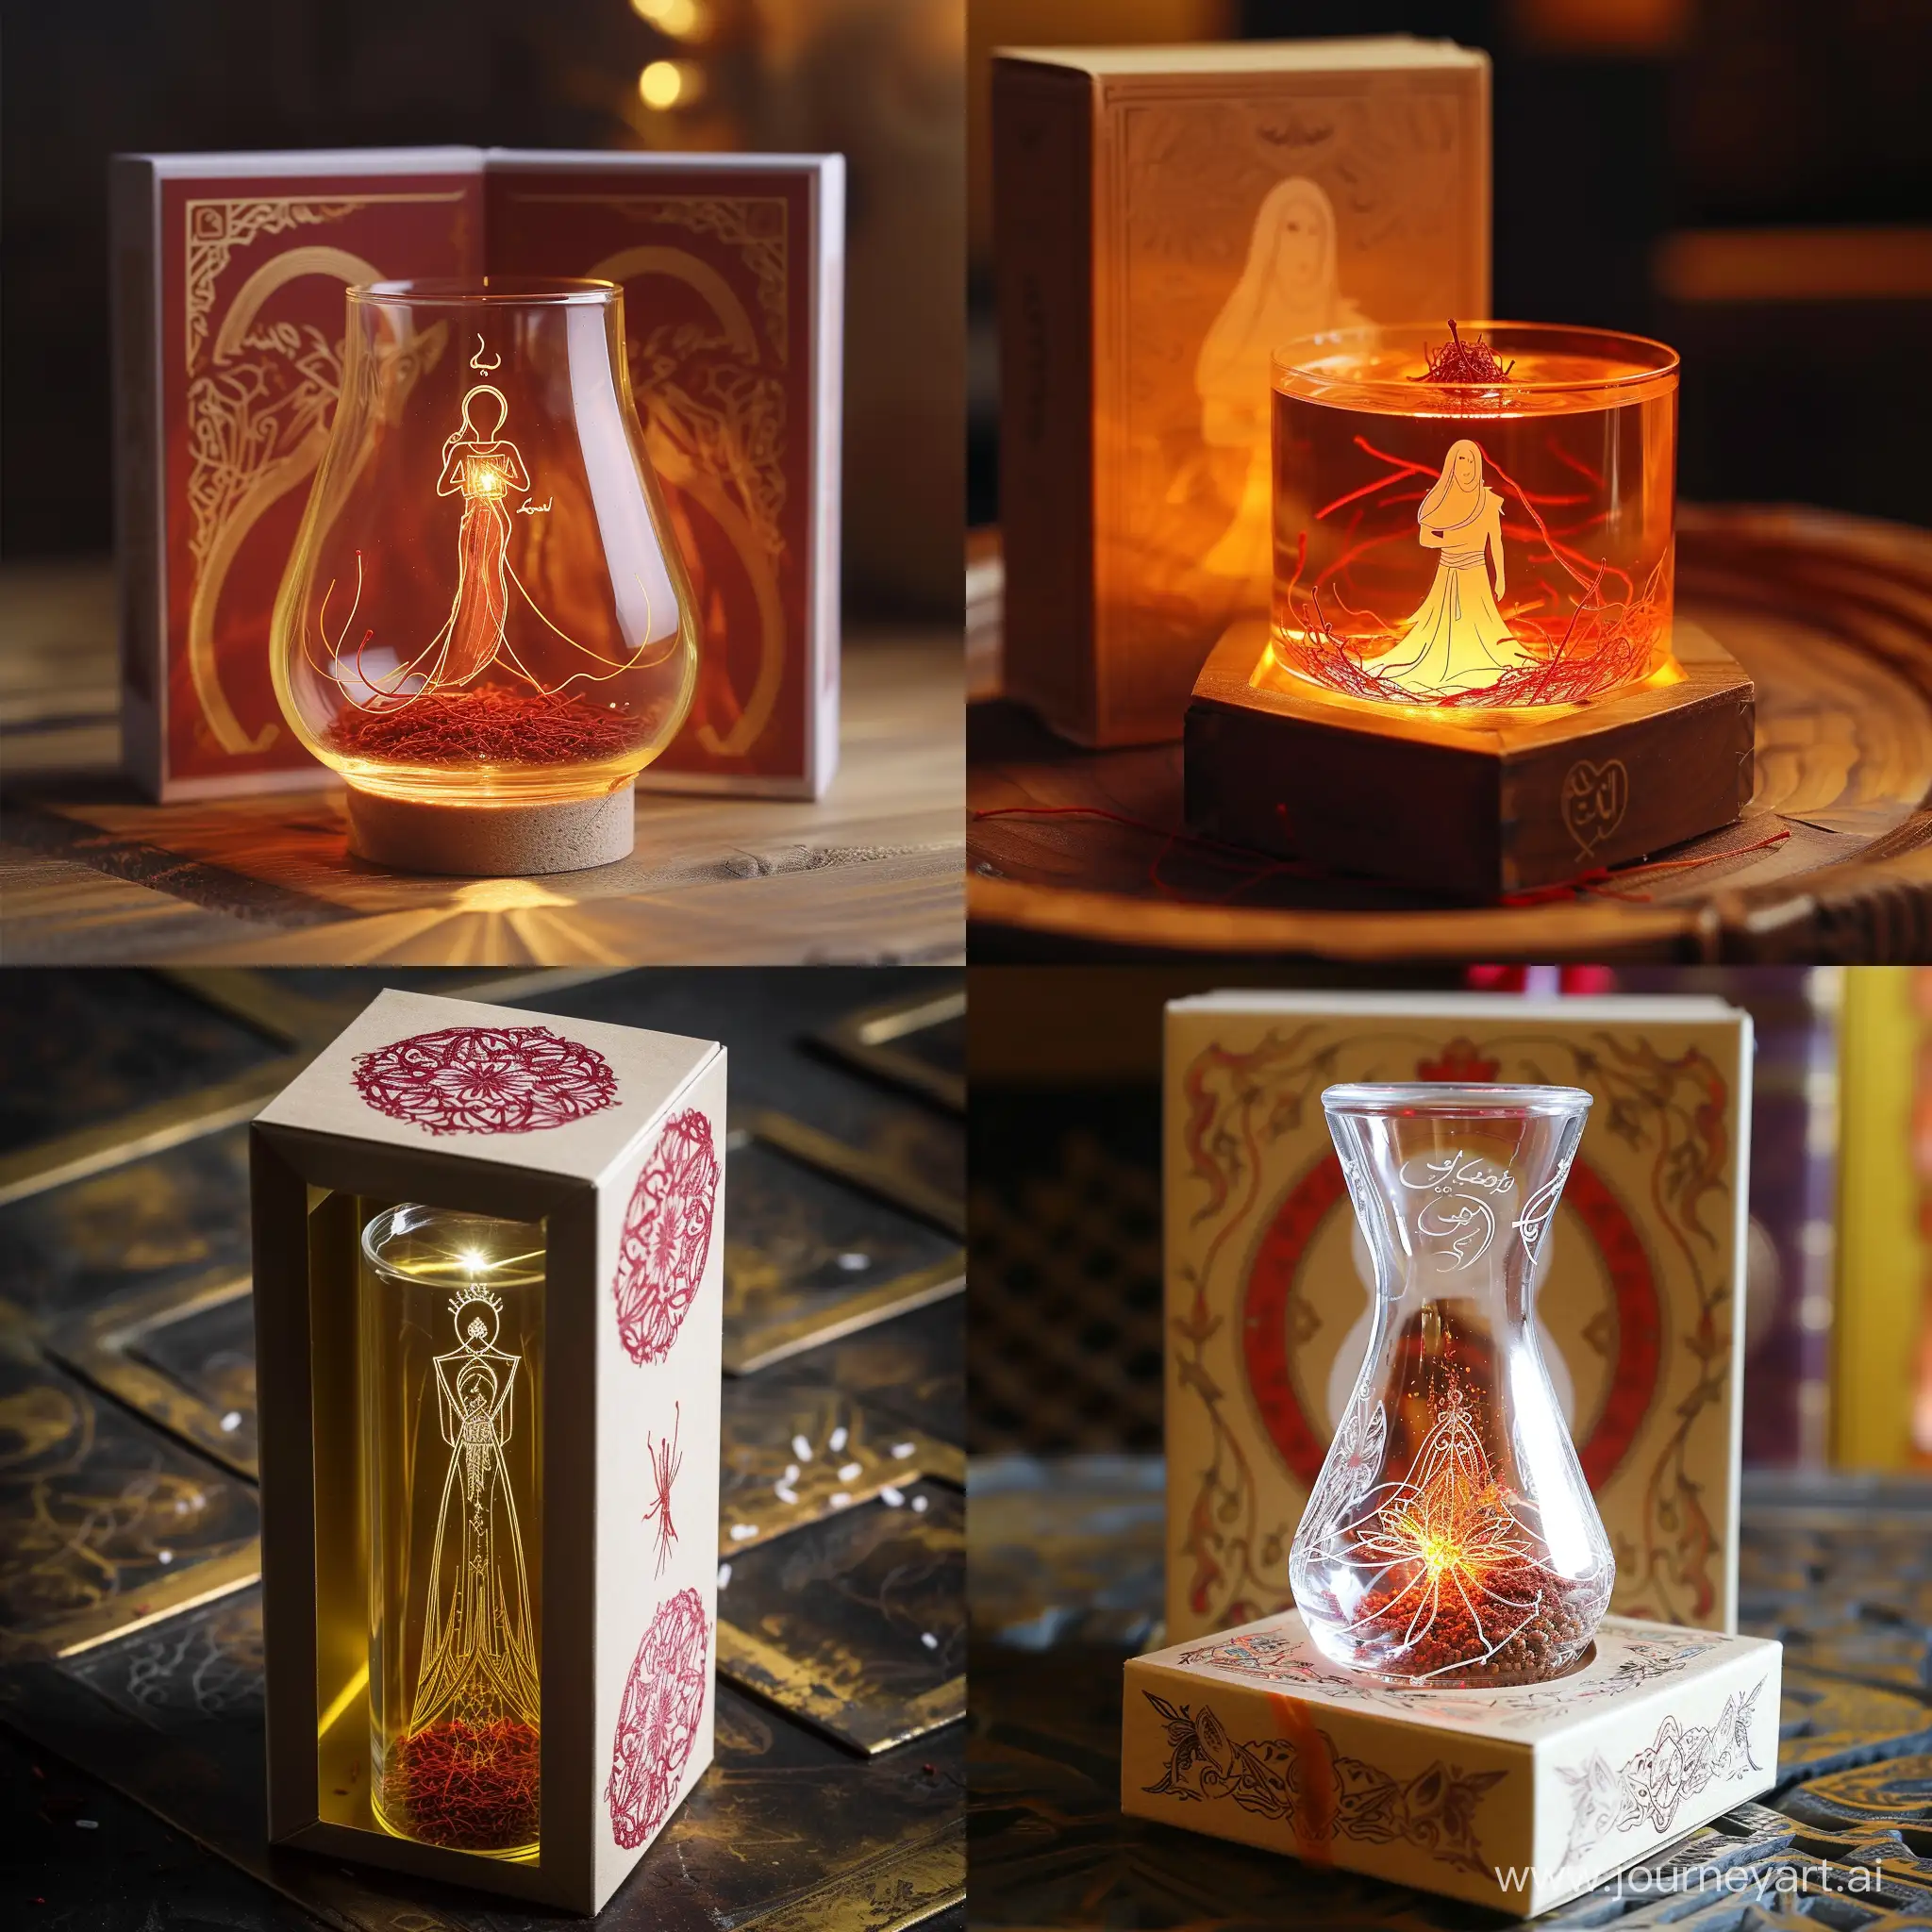 Packaging of saffron in a glass in the shape of the life glass of the movie Prince of Persia, the amazing light shines on the glass, the symbol on the box is a Sufi in a white dress, the design around the box using the symbol of the Sassanid dress. Put a very small amount of saffron inside the package